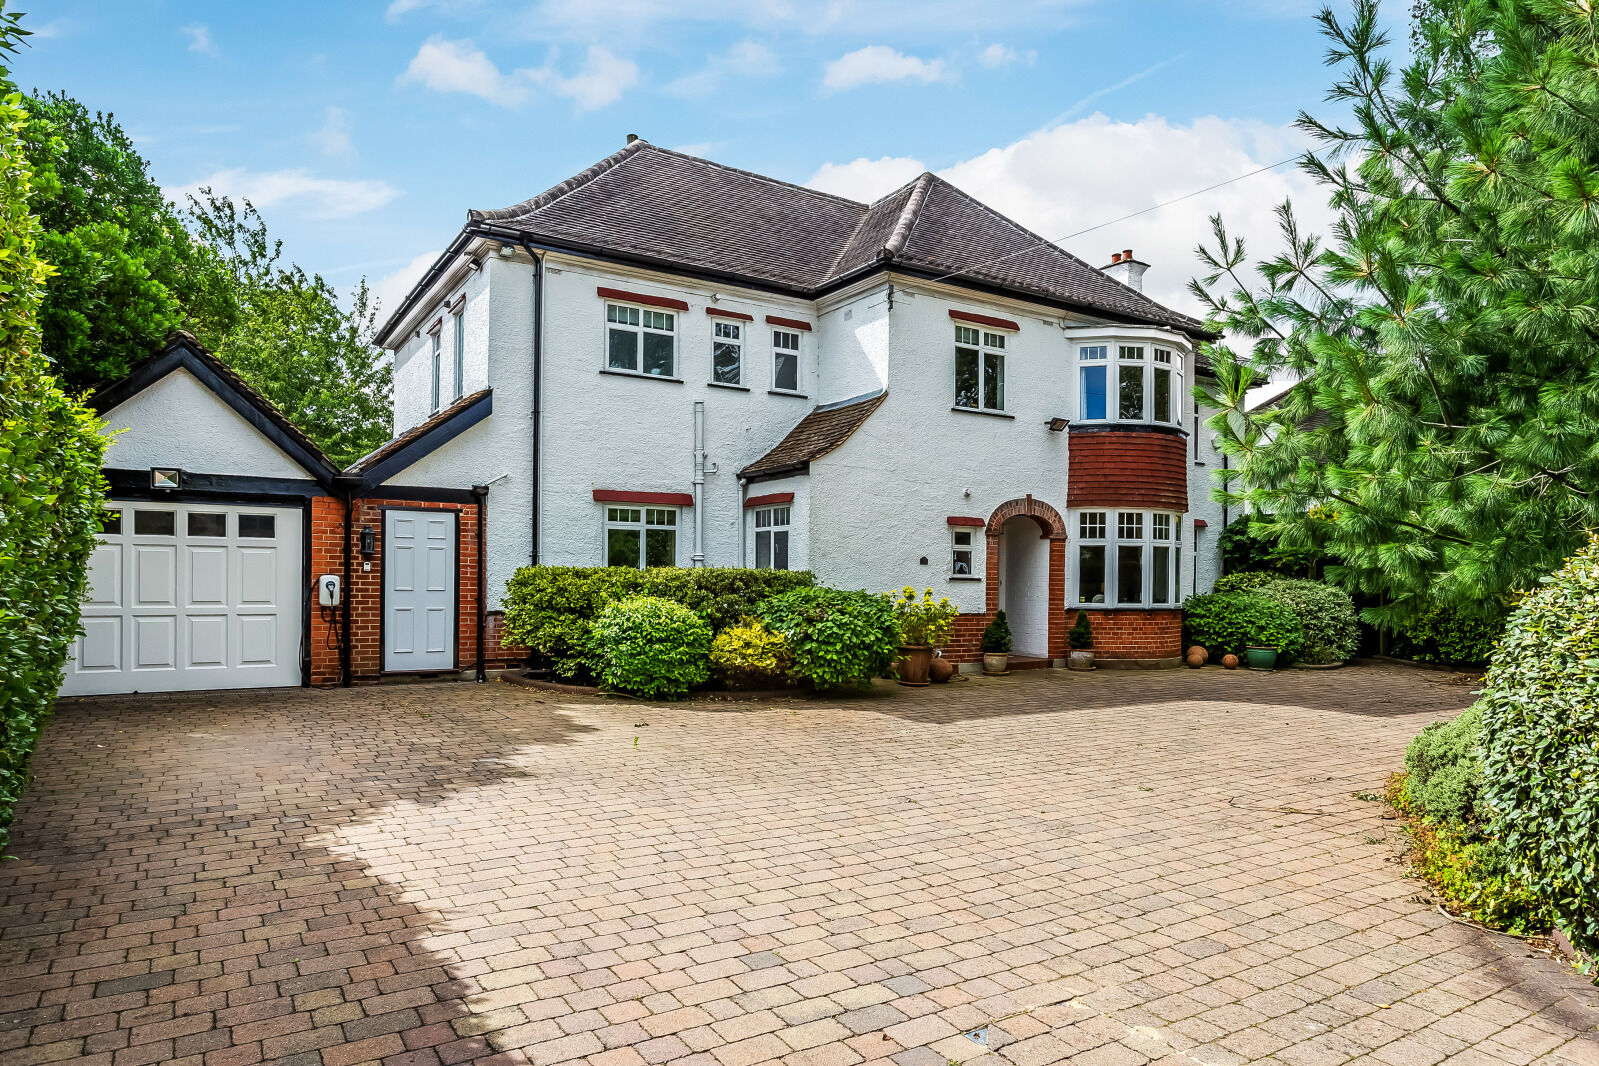 5 bedroom detached house for sale High View, Cheam, SM2, main image